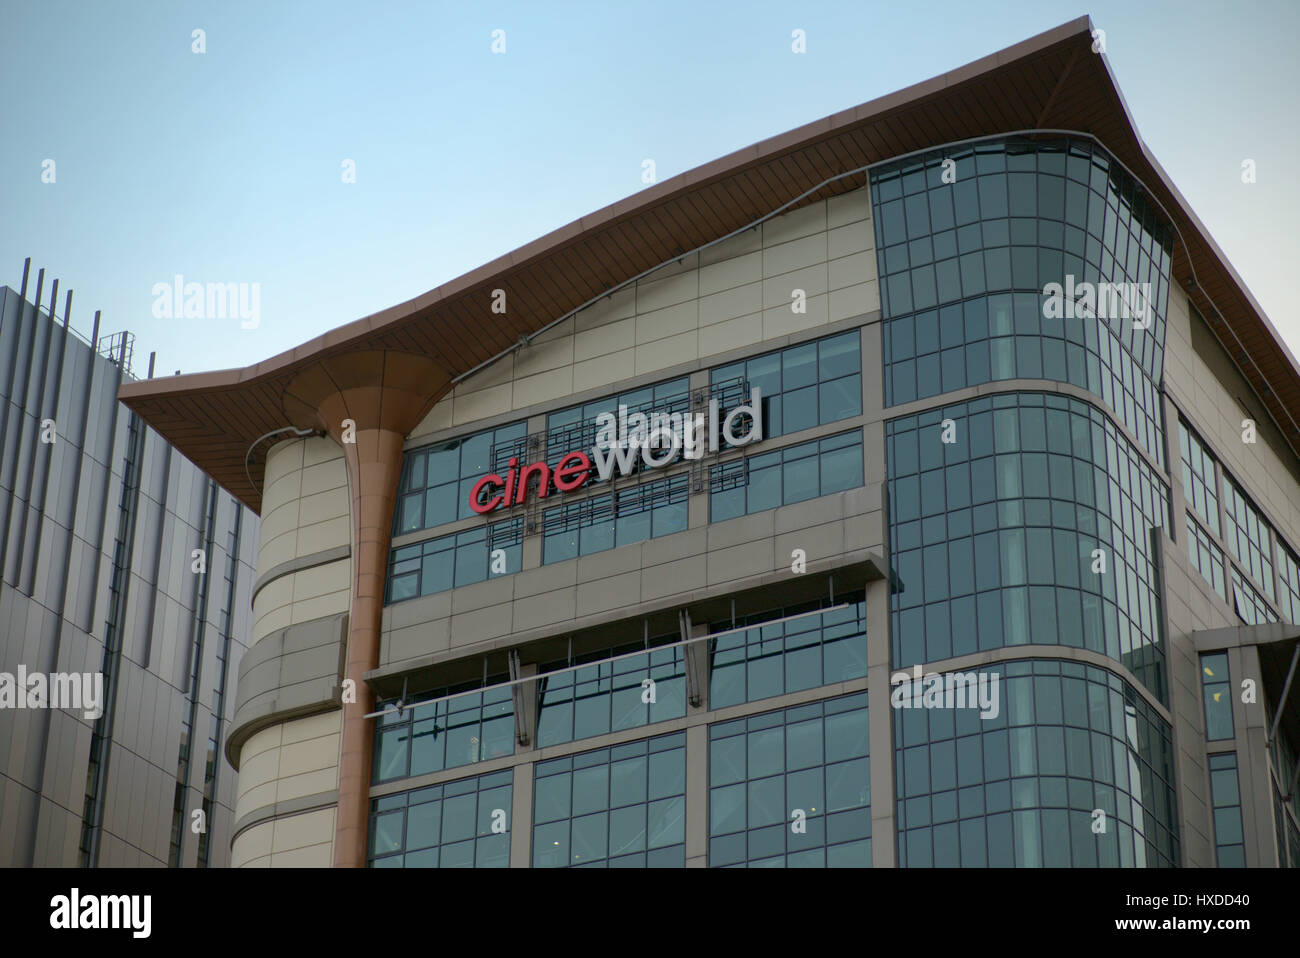 Cineworld Glasgow  At 203 feet (62 metres) high, the building is currently the tallest cinema in the world Stock Photo